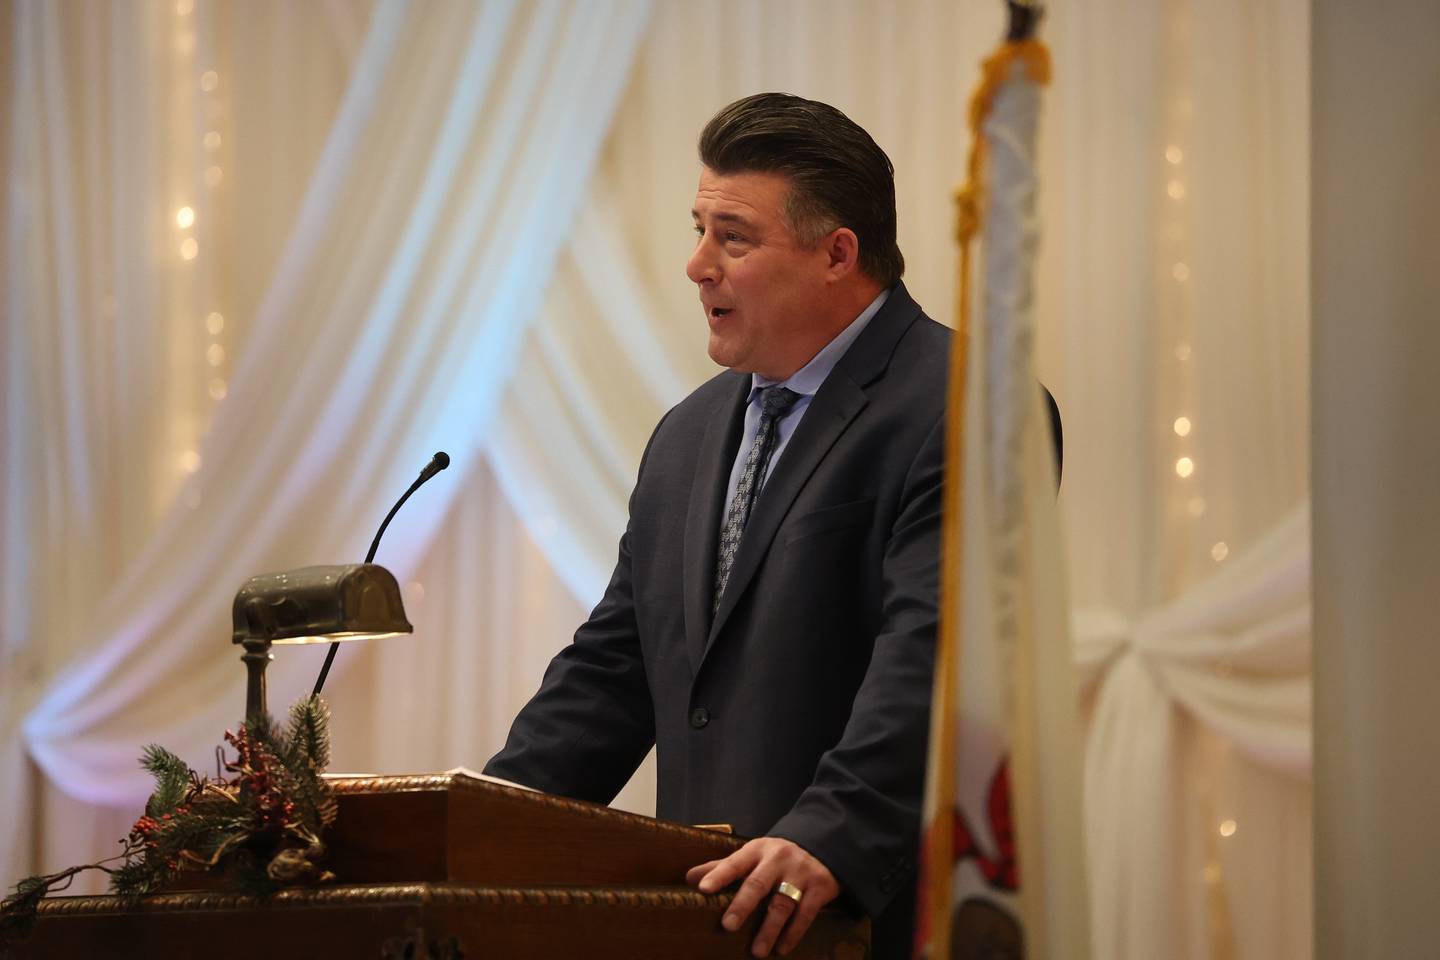 President of the Will County Bar Association Thomas Manzella speaks at the State of the Courthouse luncheon at Jacob Henry Mansion in Joliet on Wednesday February 1st, 2023.